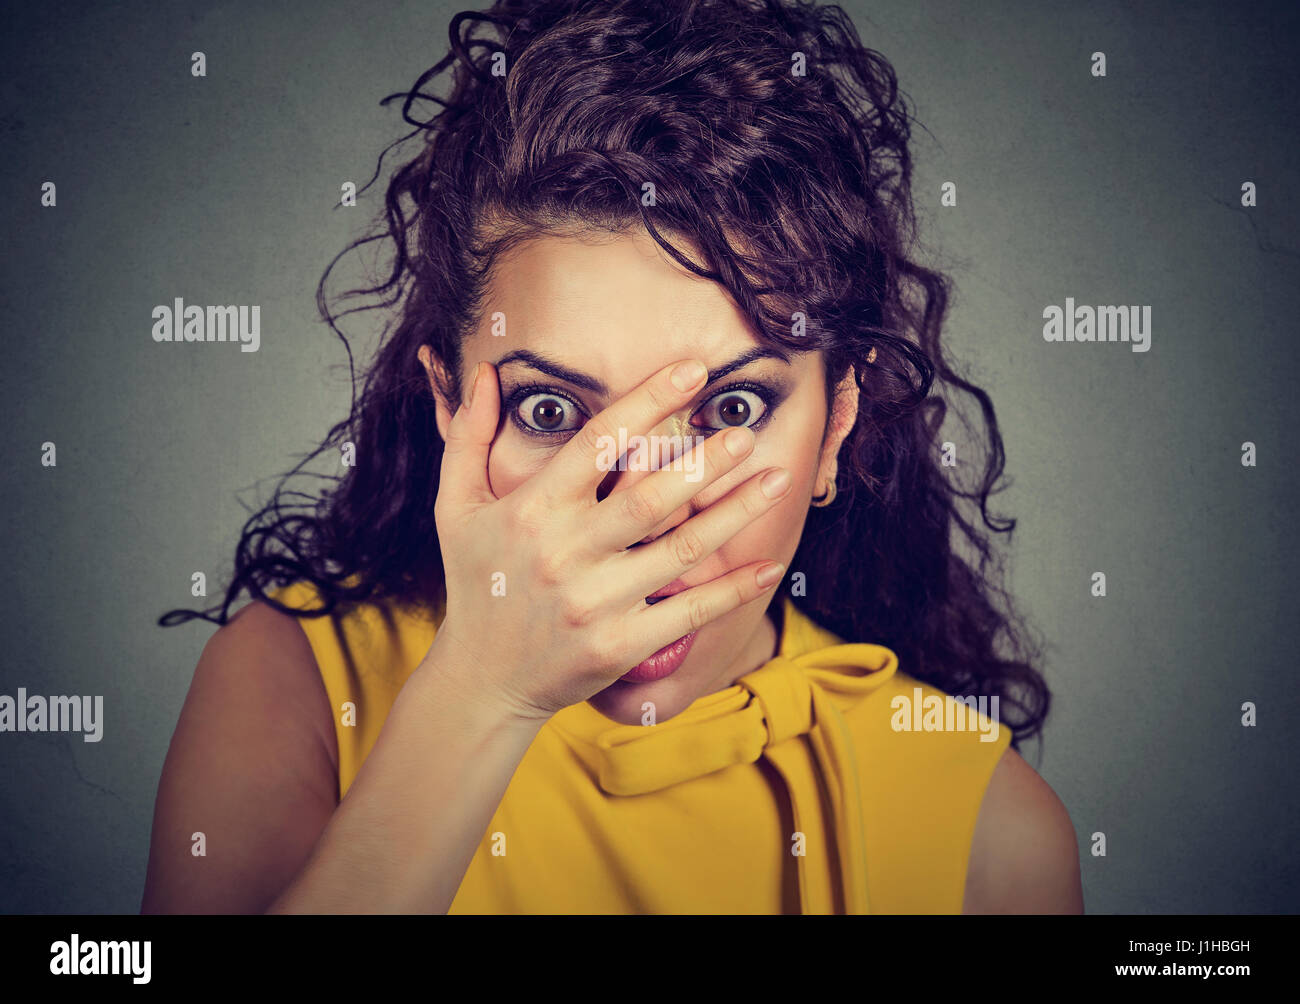 Scared young woman covering her face with hands peeking through fingers Stock Photo